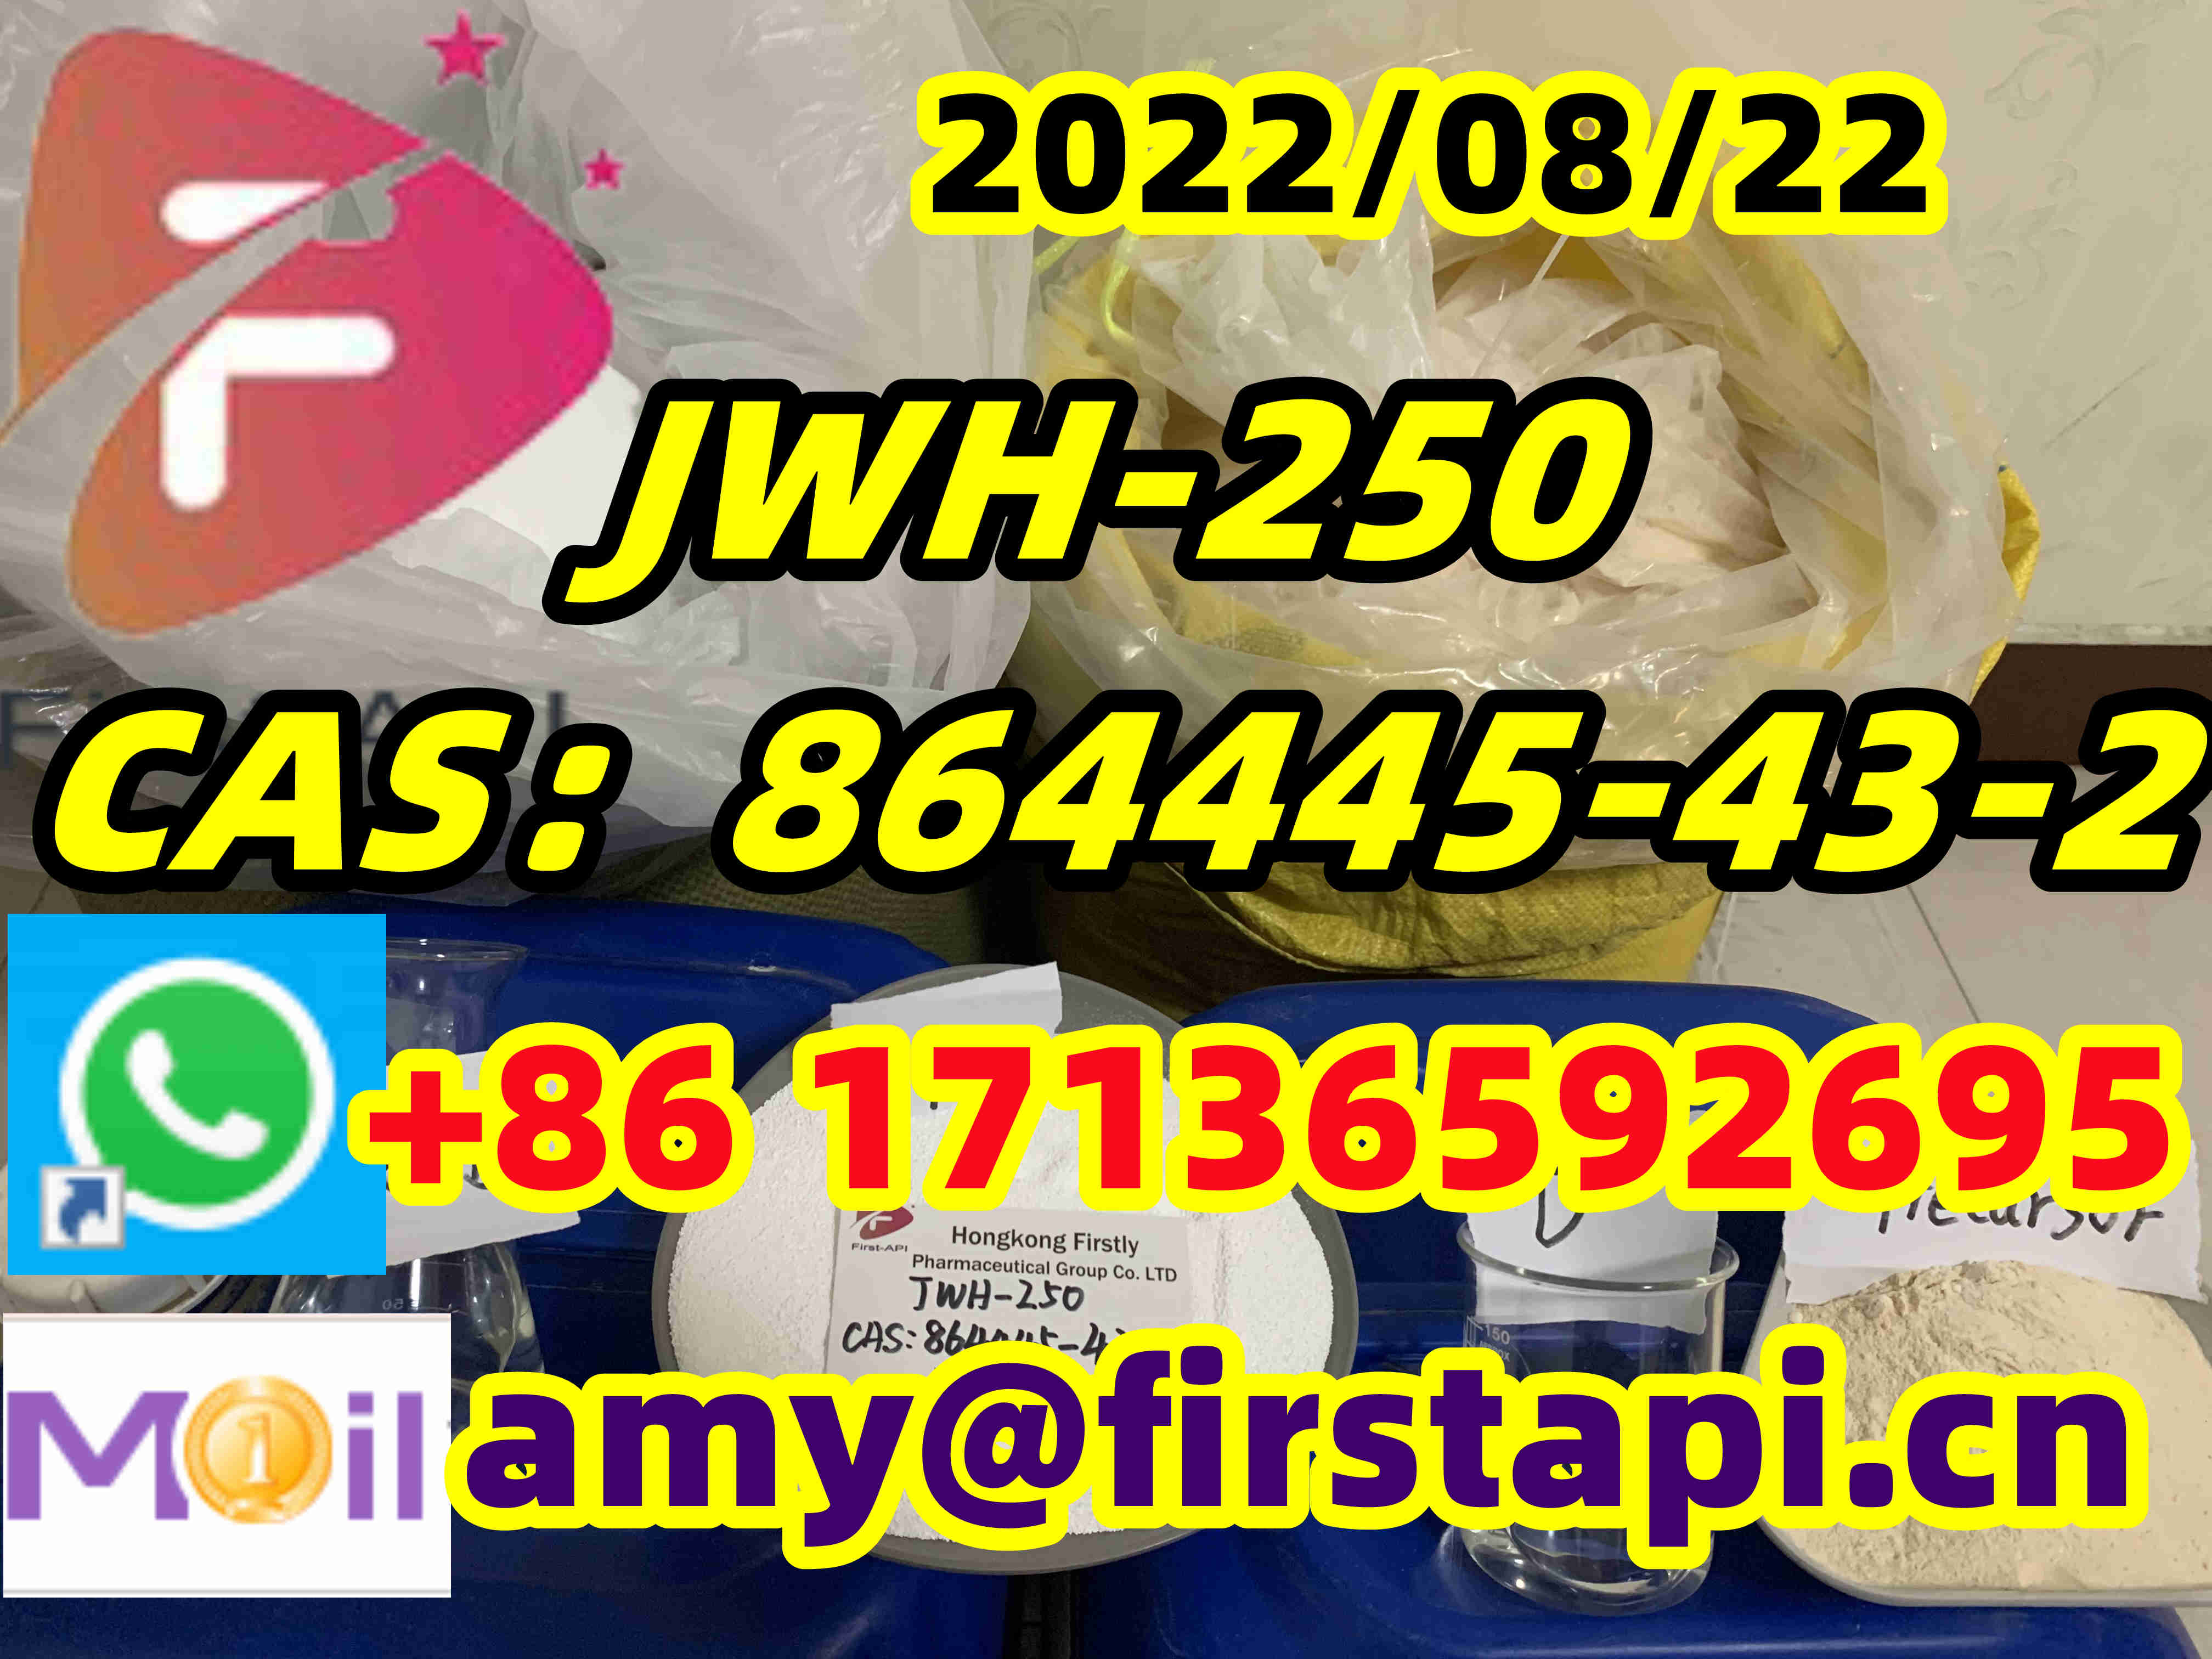 High quality,low price,JWH-250,CAS:864445-43-2,fast delivery - photo